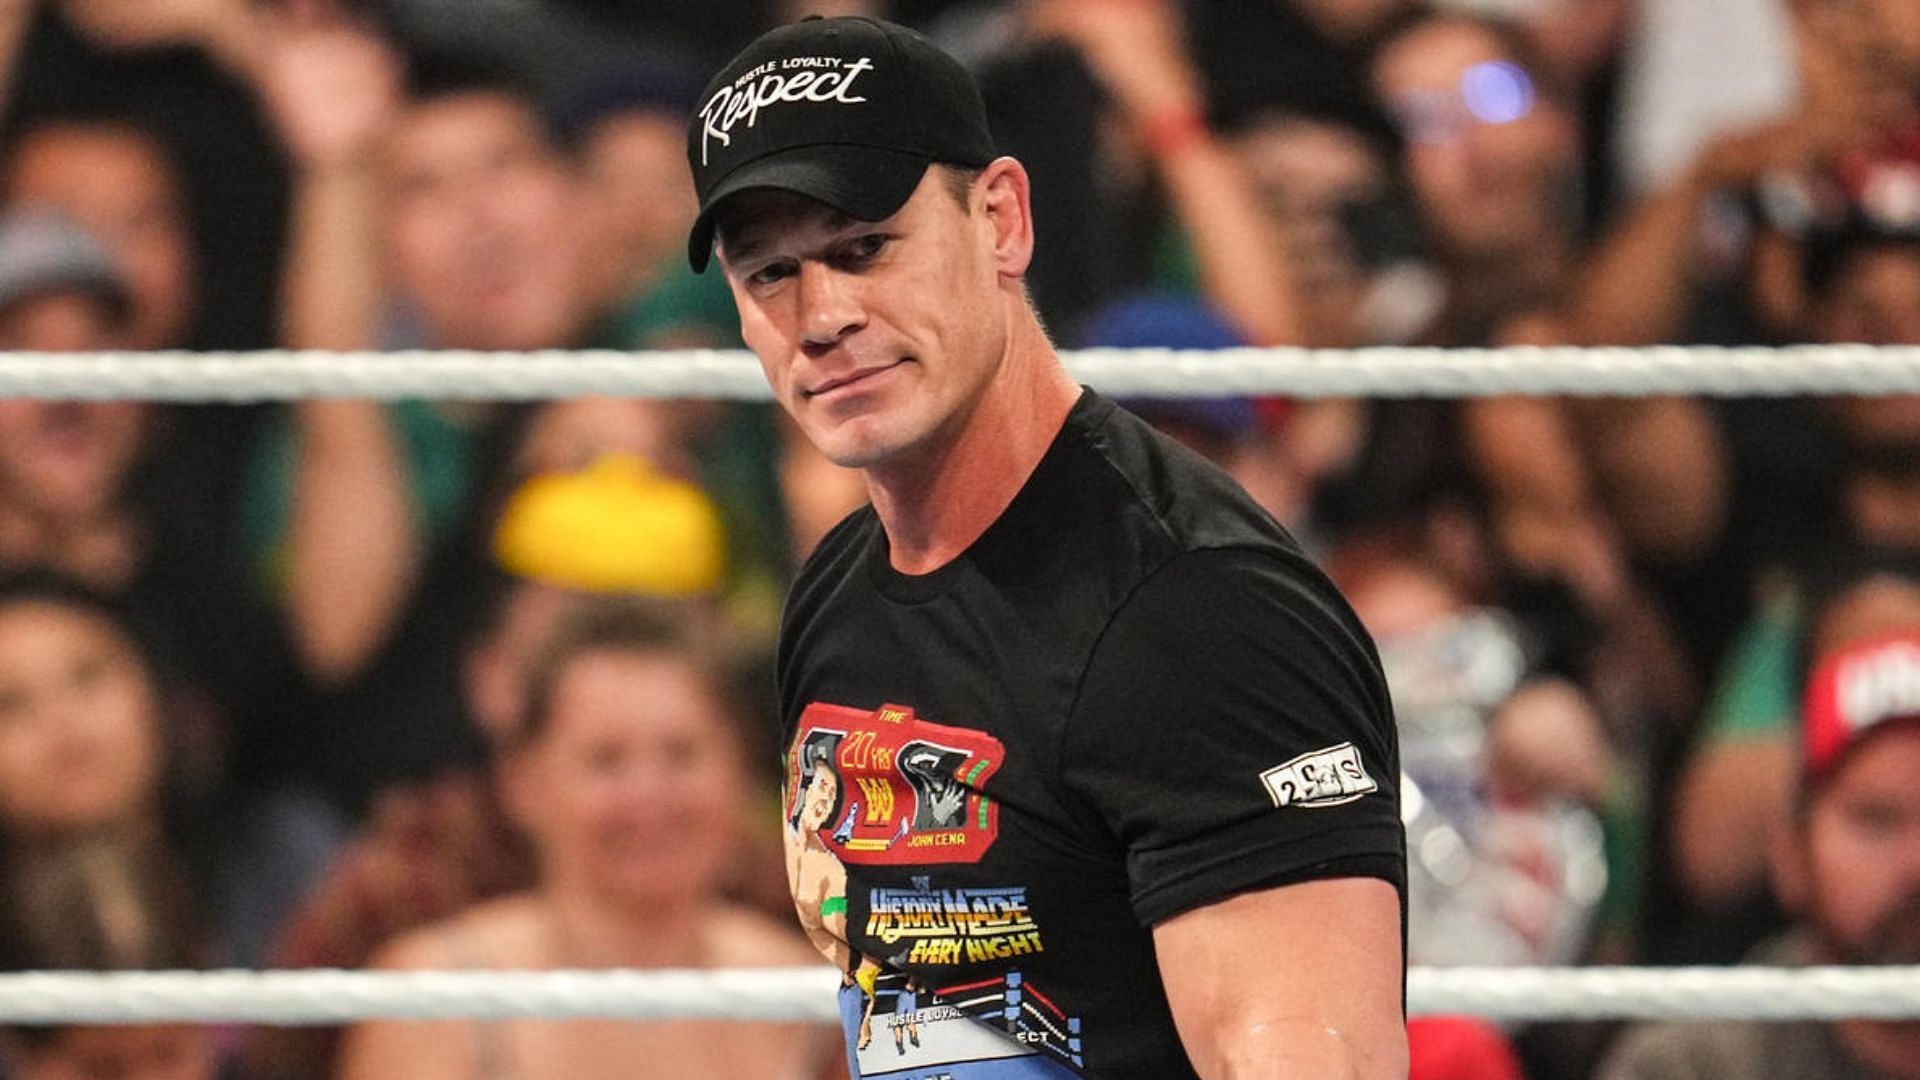 John Cena is coming back to WWE!